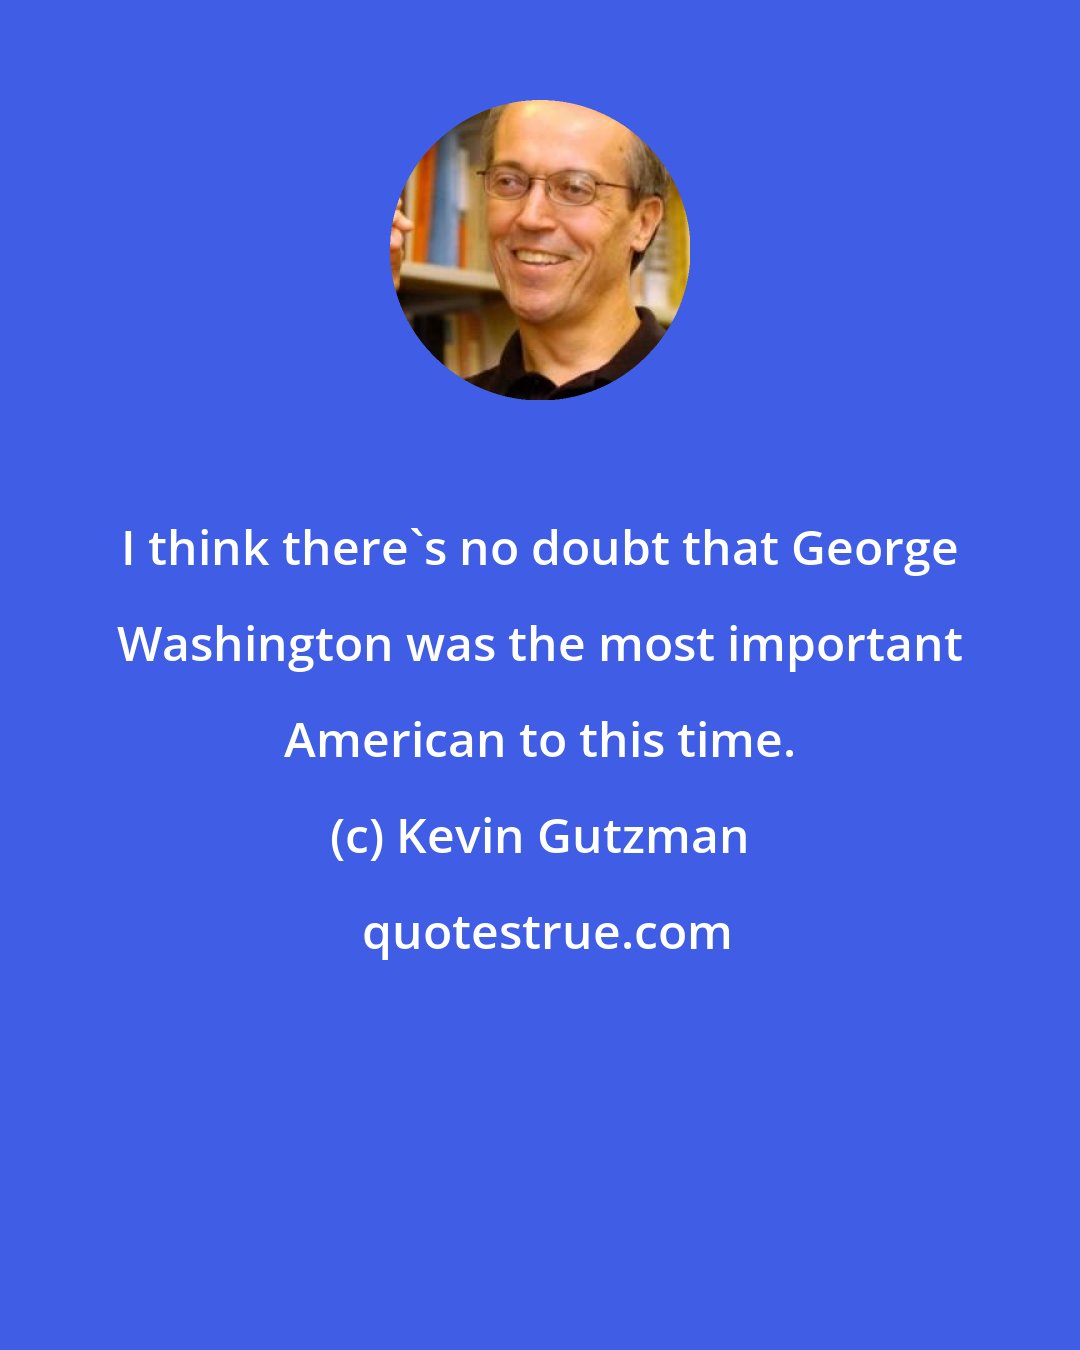 Kevin Gutzman: I think there's no doubt that George Washington was the most important American to this time.